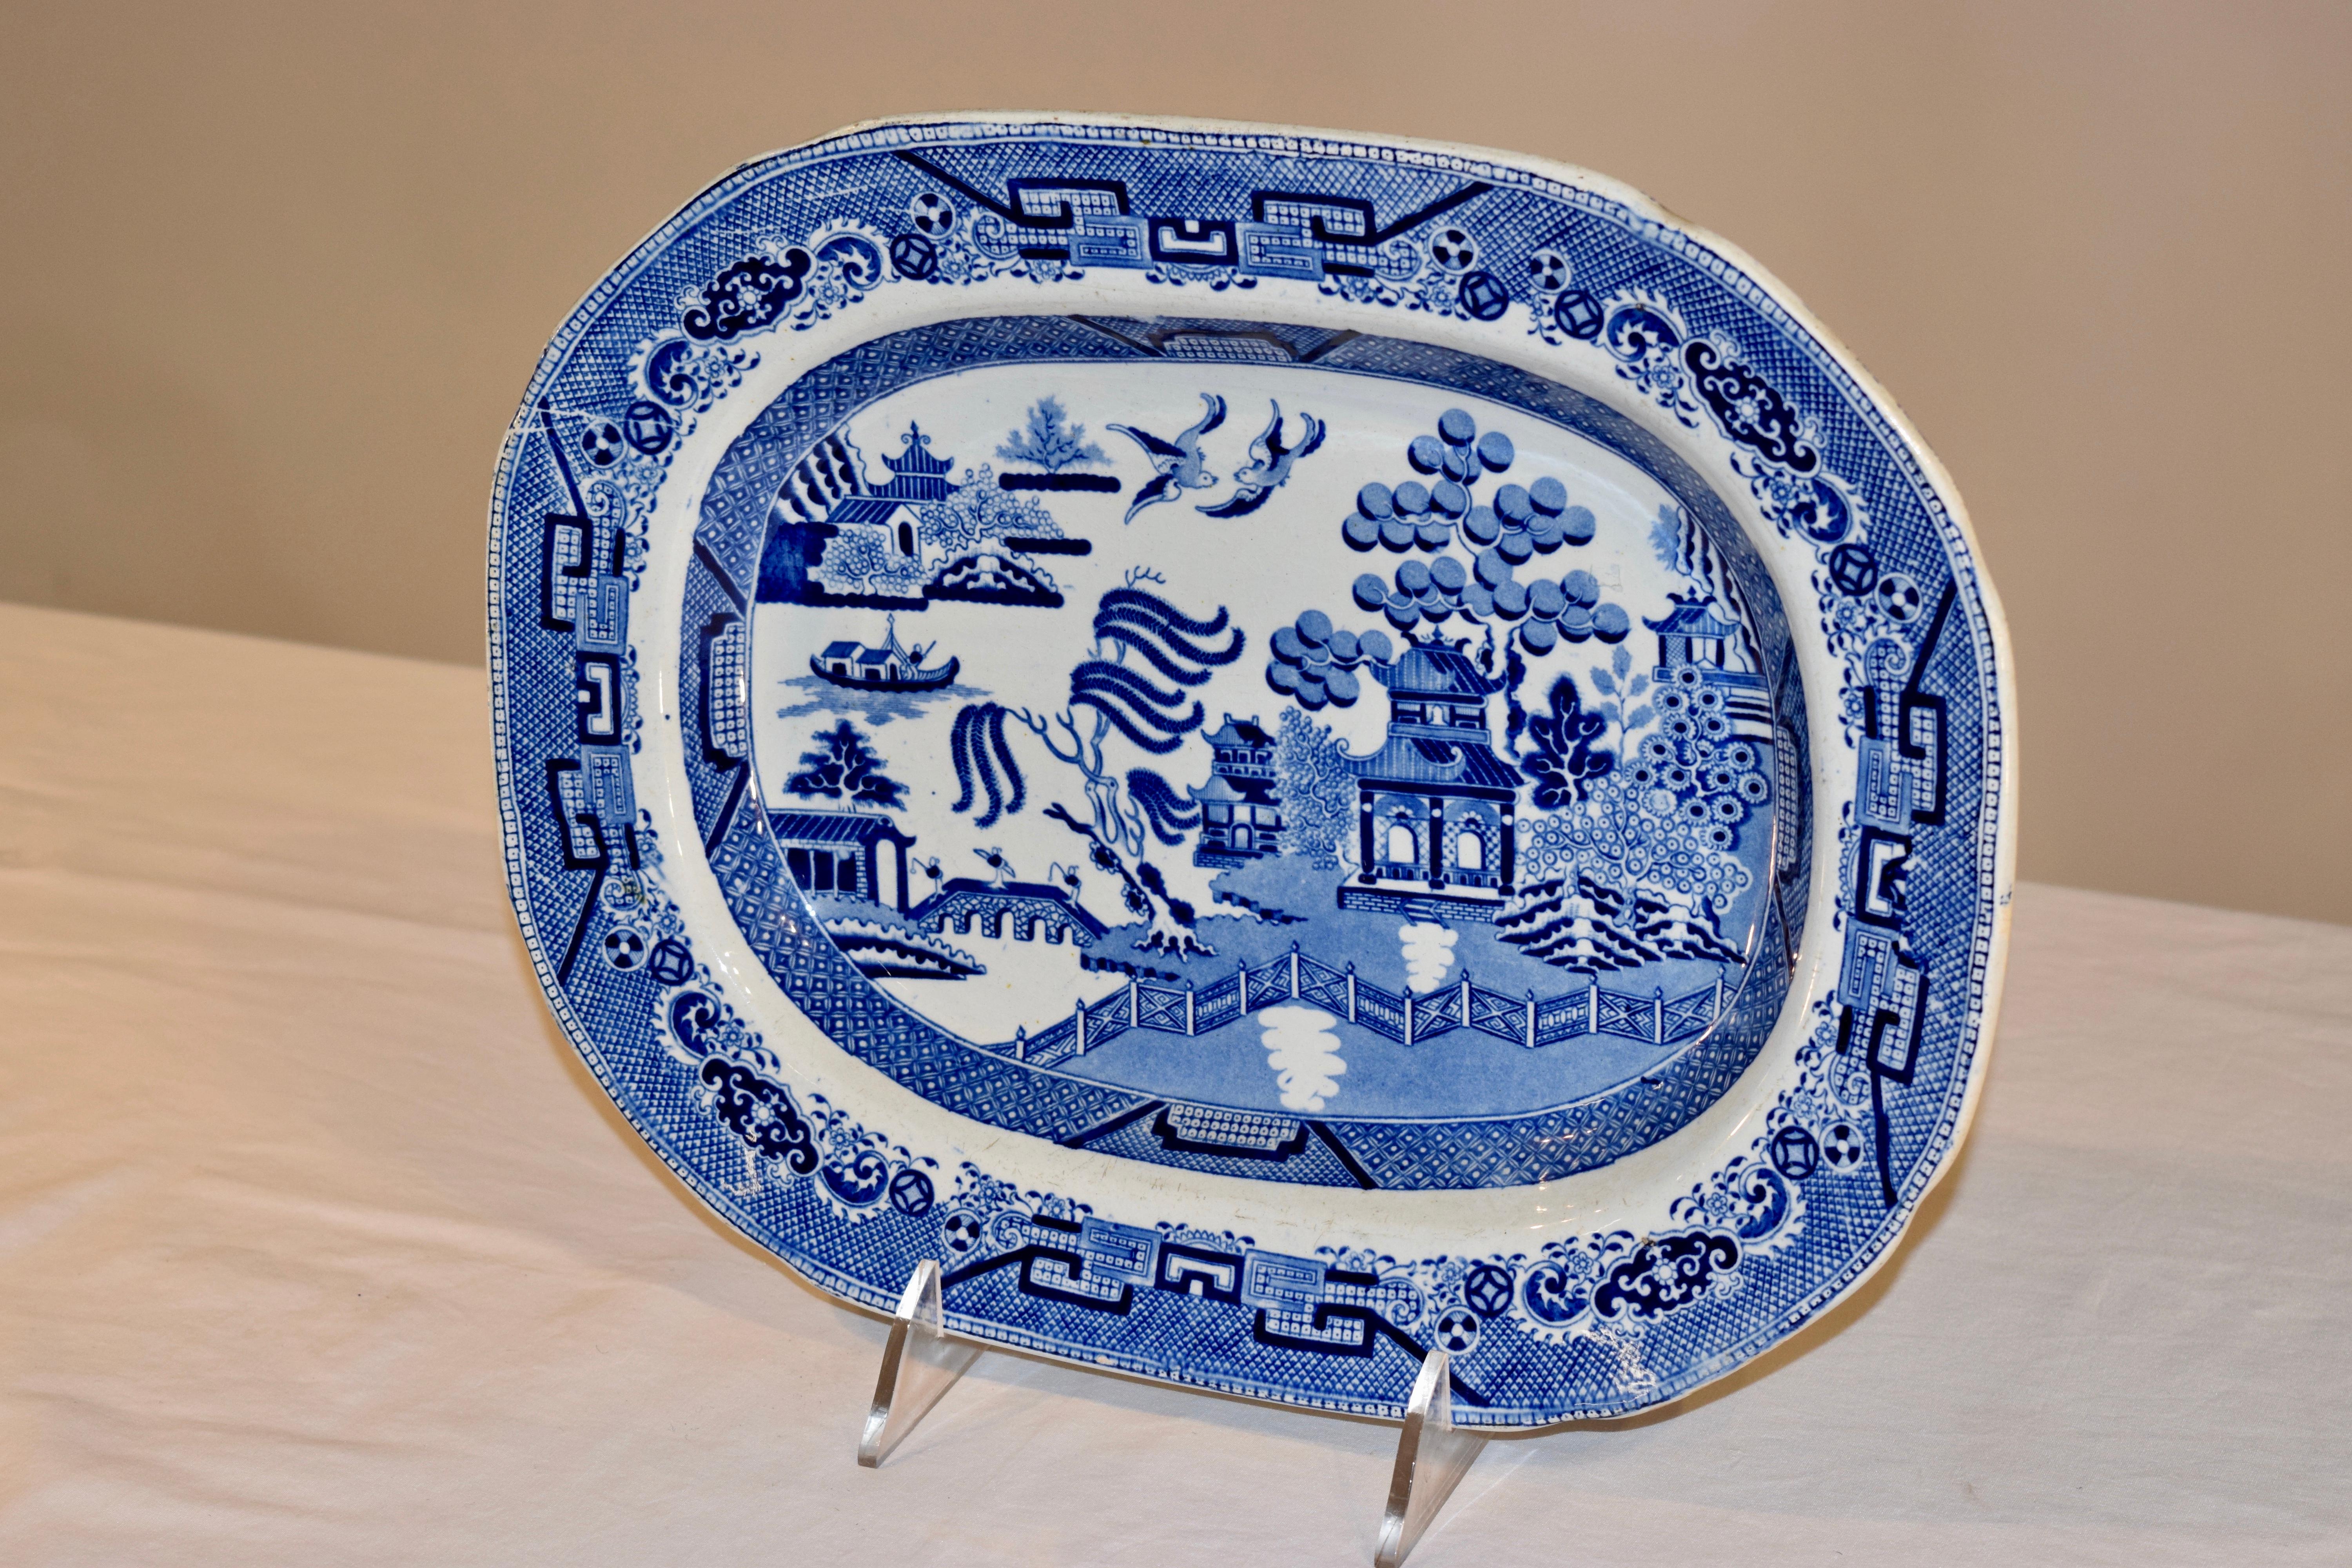 19th century Staffordshire transferware platter in the highly collectable 